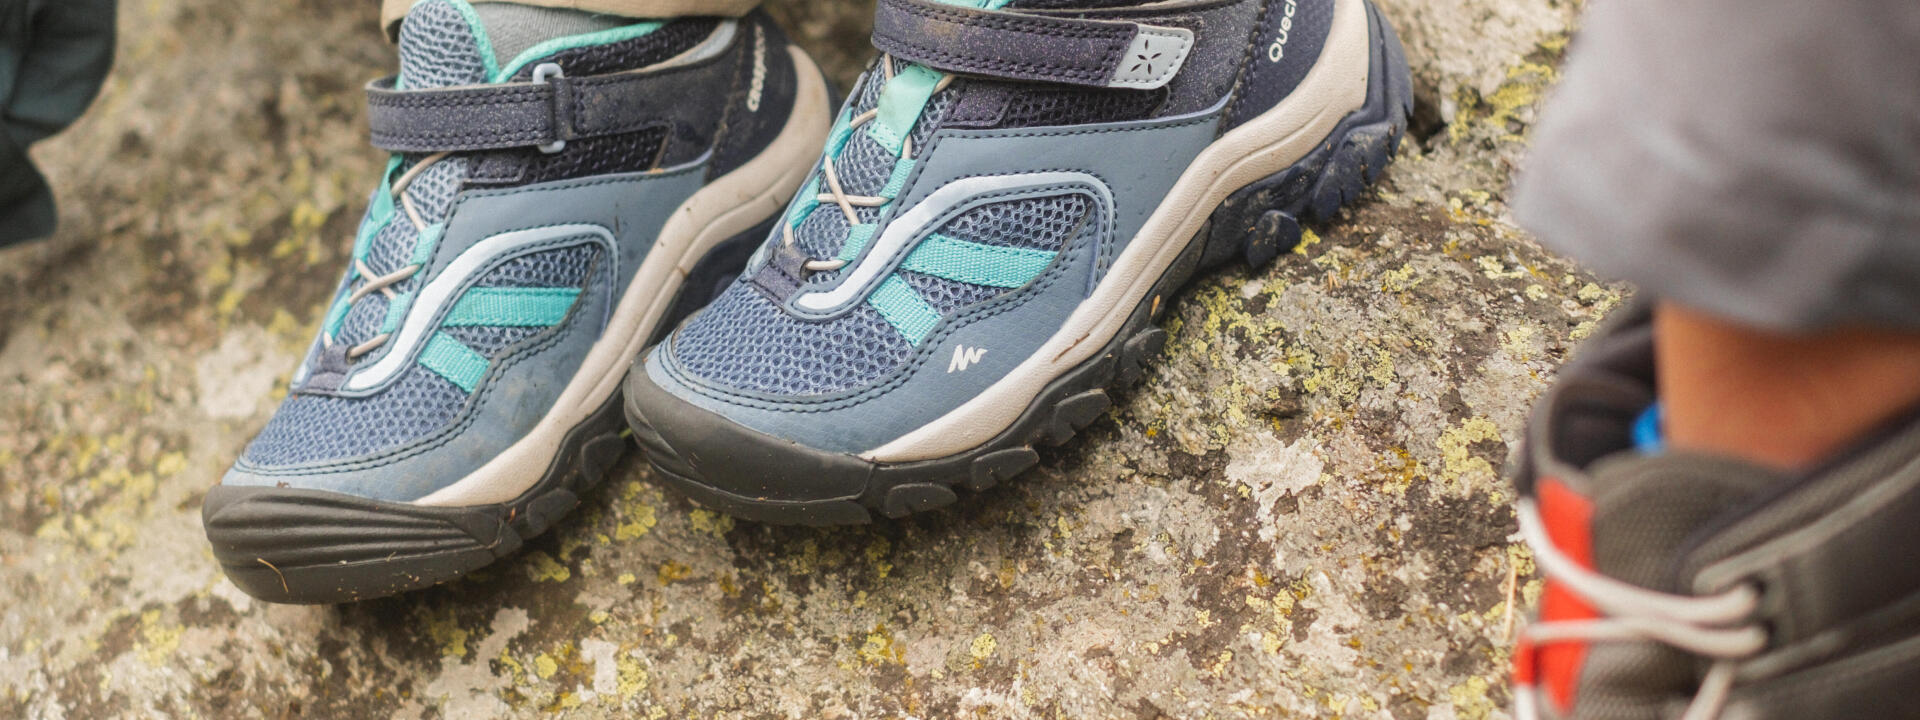 Choosing the right babies' hiking shoes